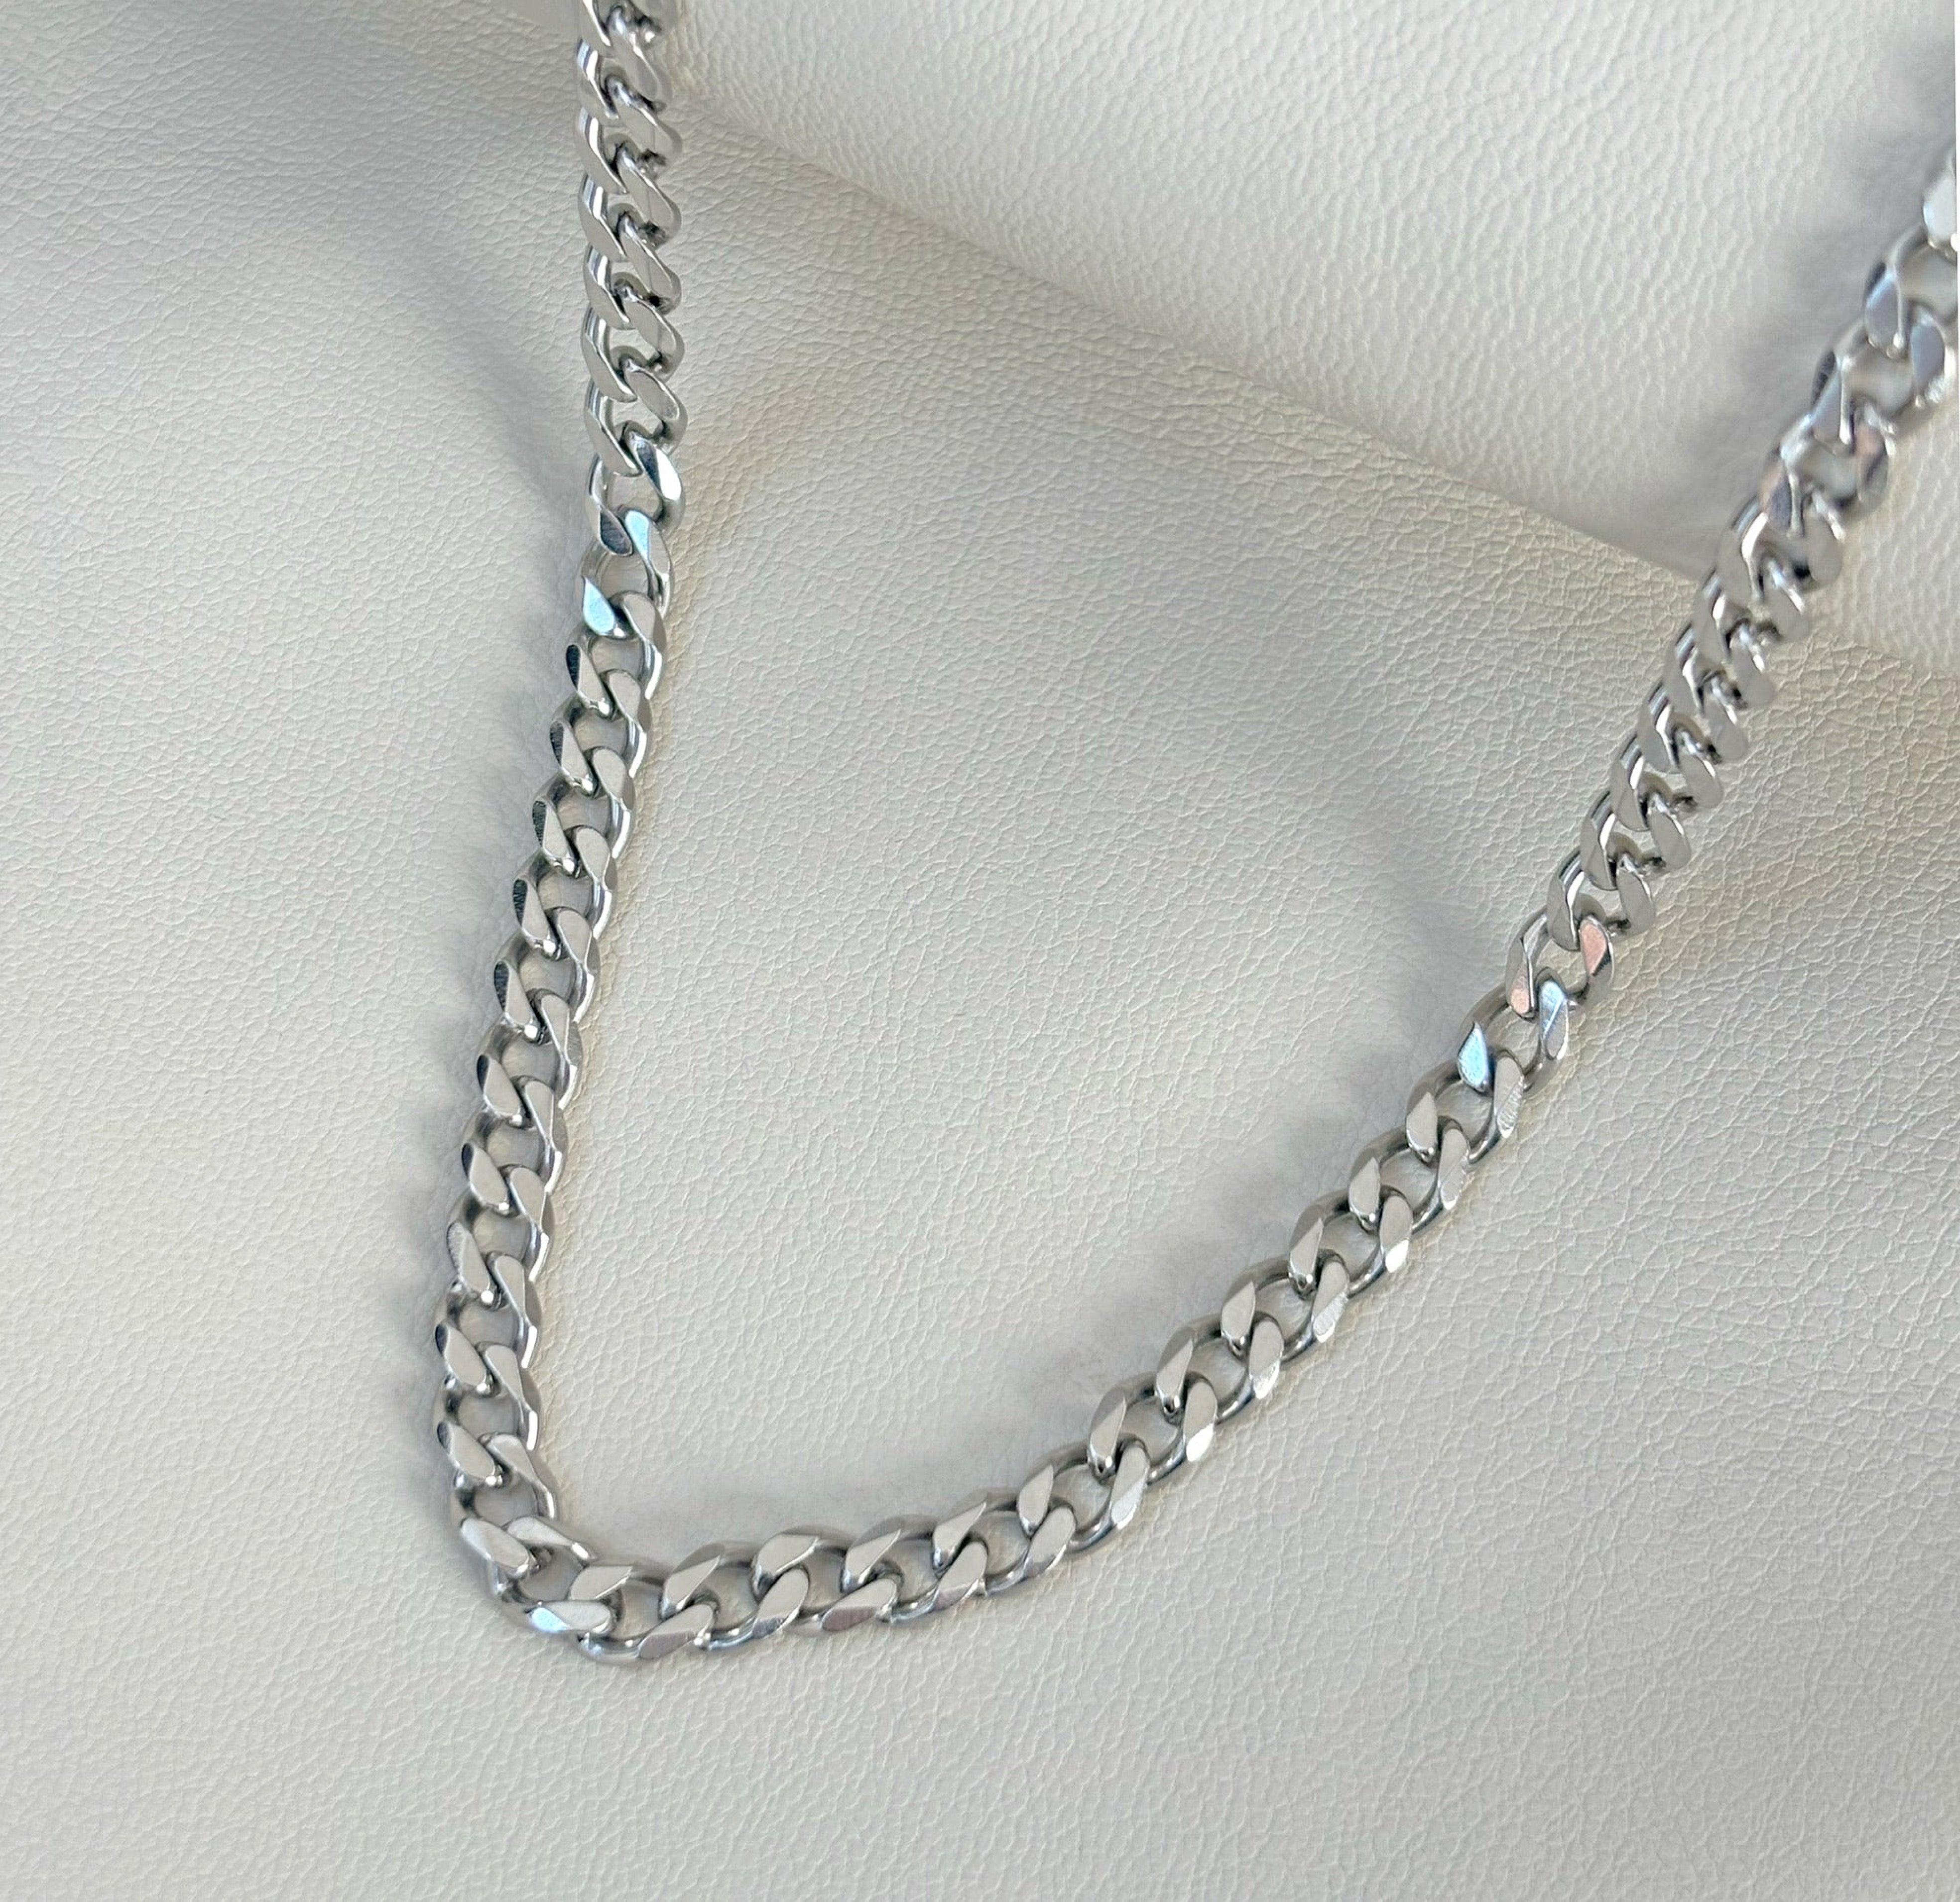 medium silver curb chain necklace waterproof 